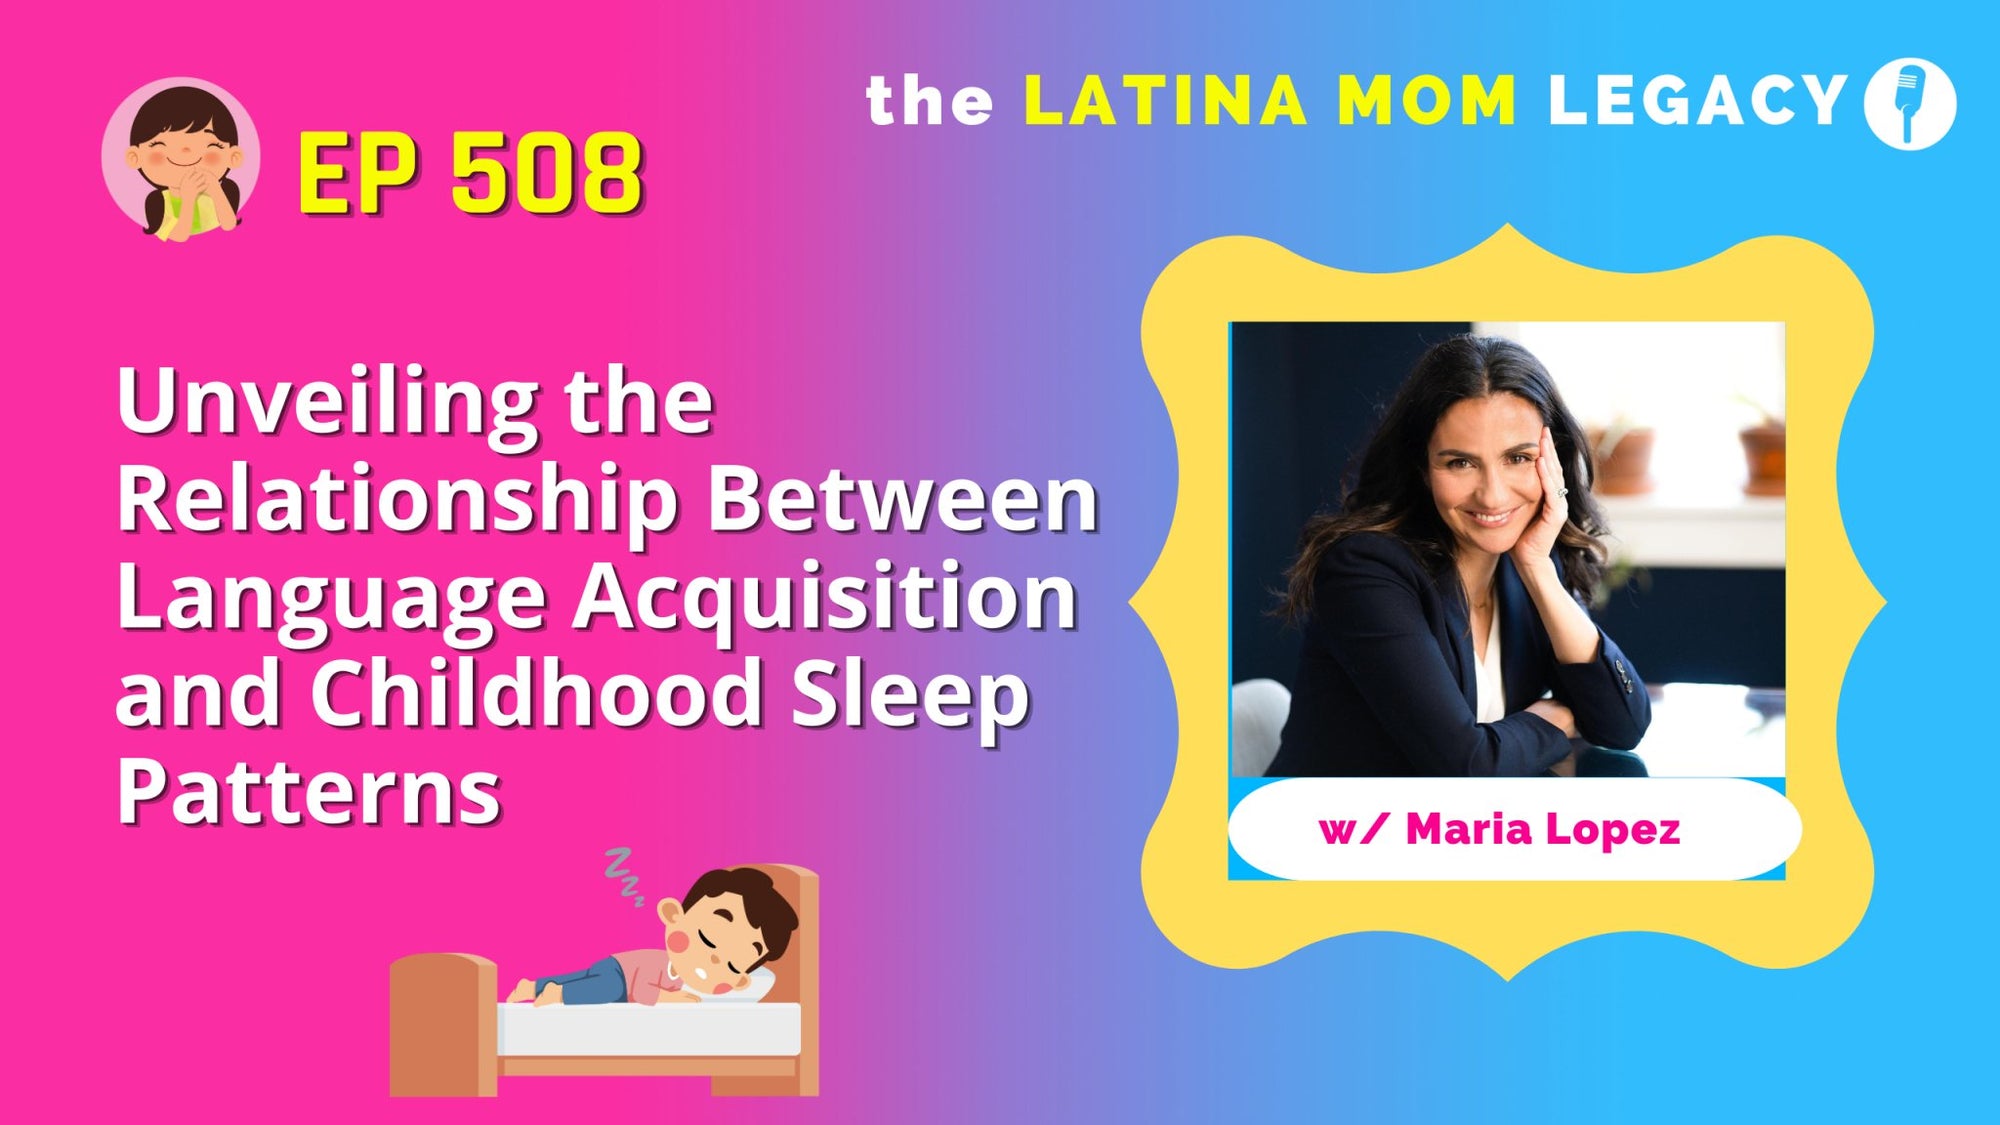 508-Maria Lopez:Unveiling the Relationship Between Language Acquisition and Childhood Sleep Patterns - Mi LegaSi